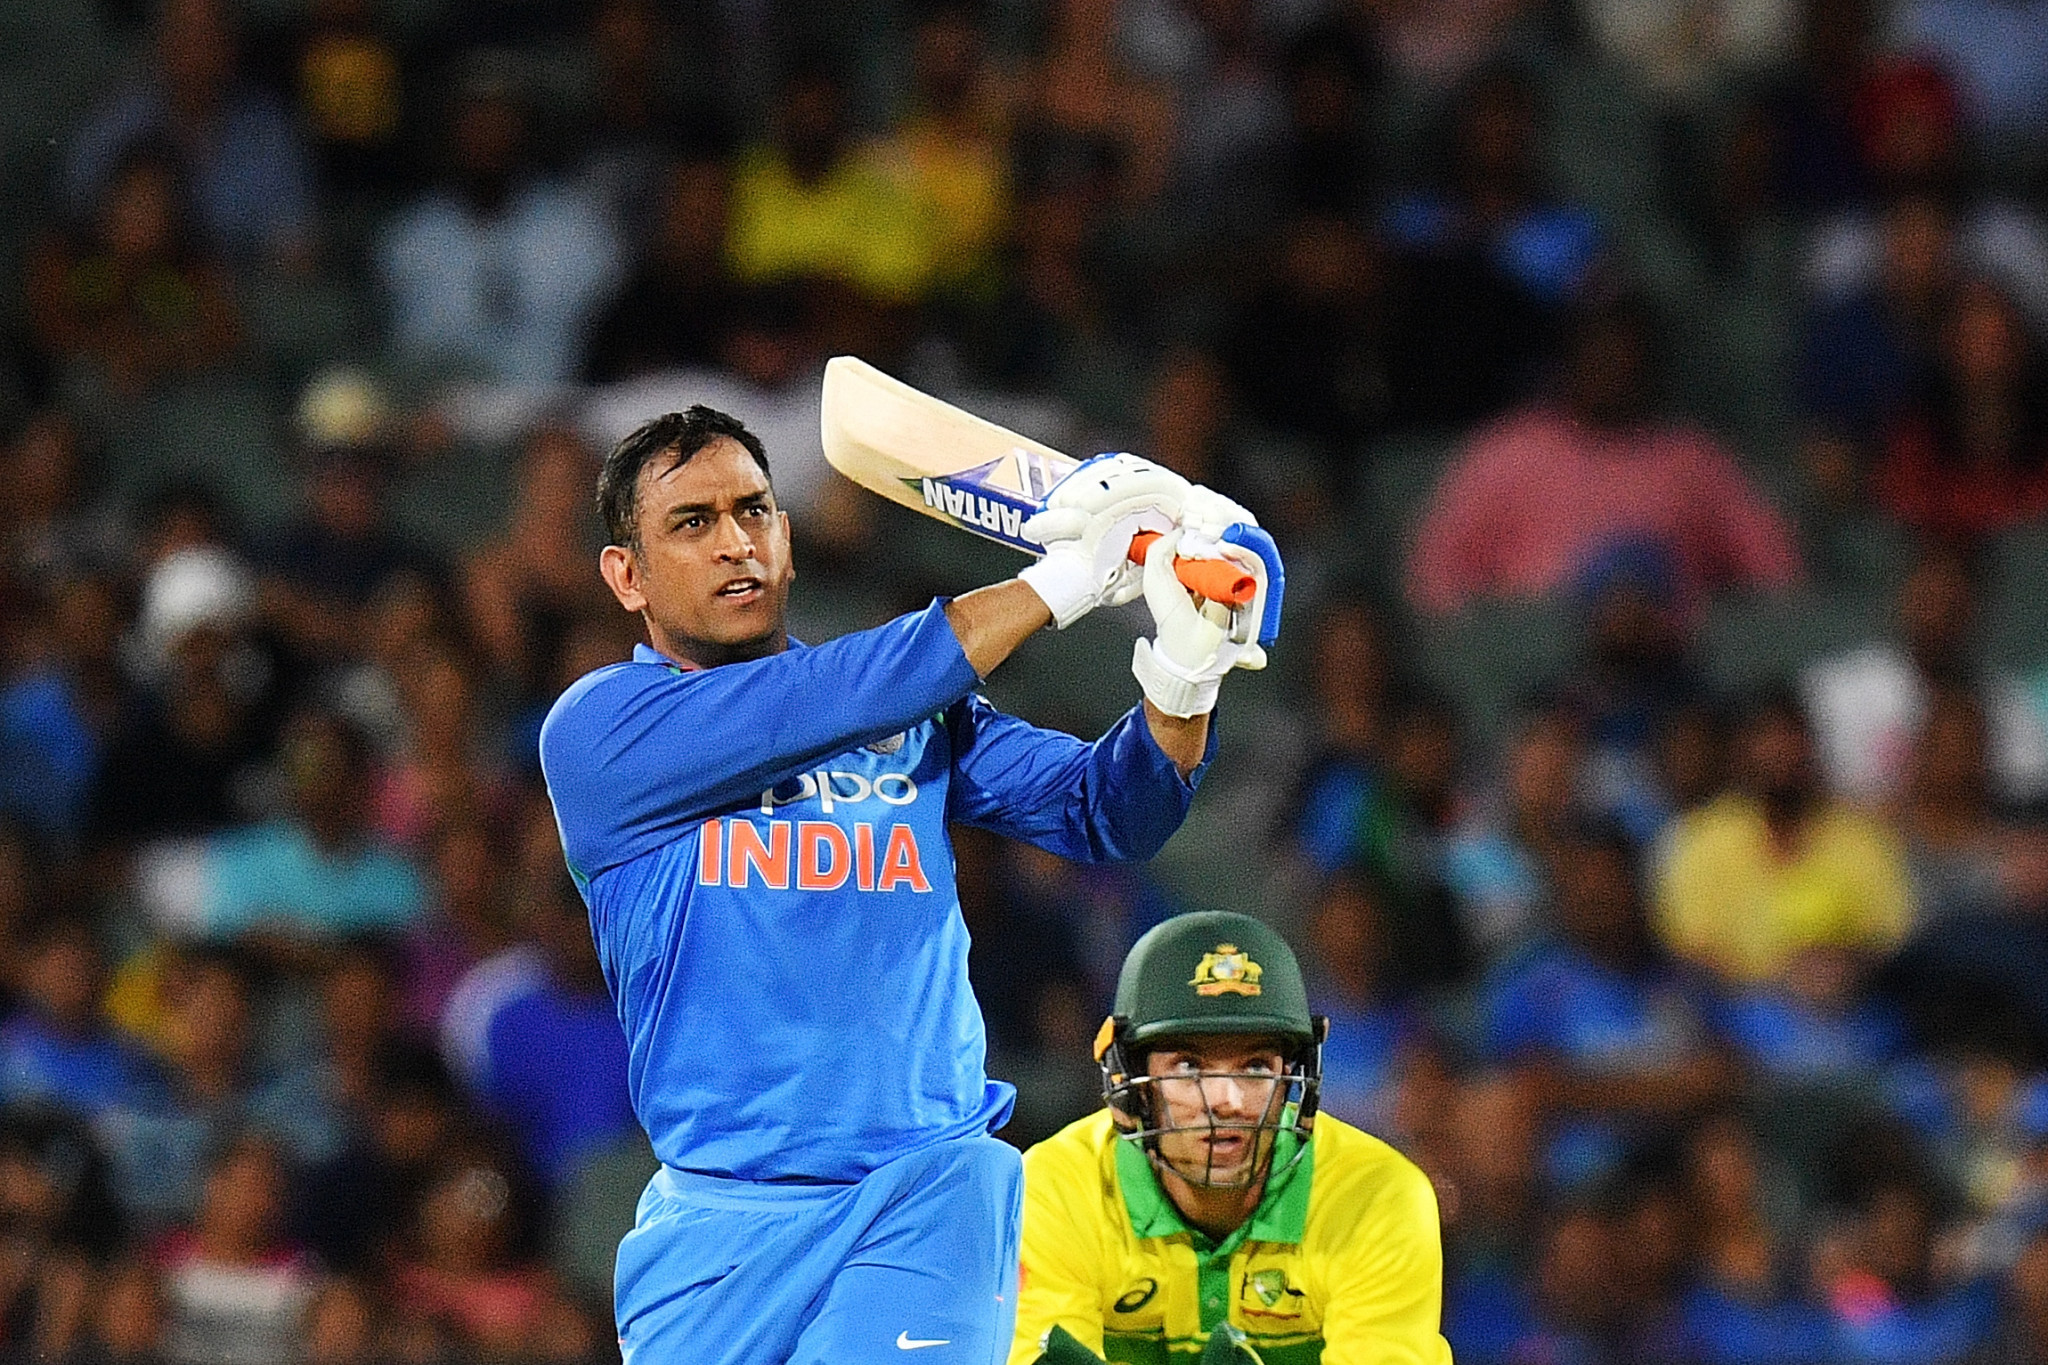 Mahendra Singh Dhoni won the 50-over and 20-over World Cups with India ©Getty Images